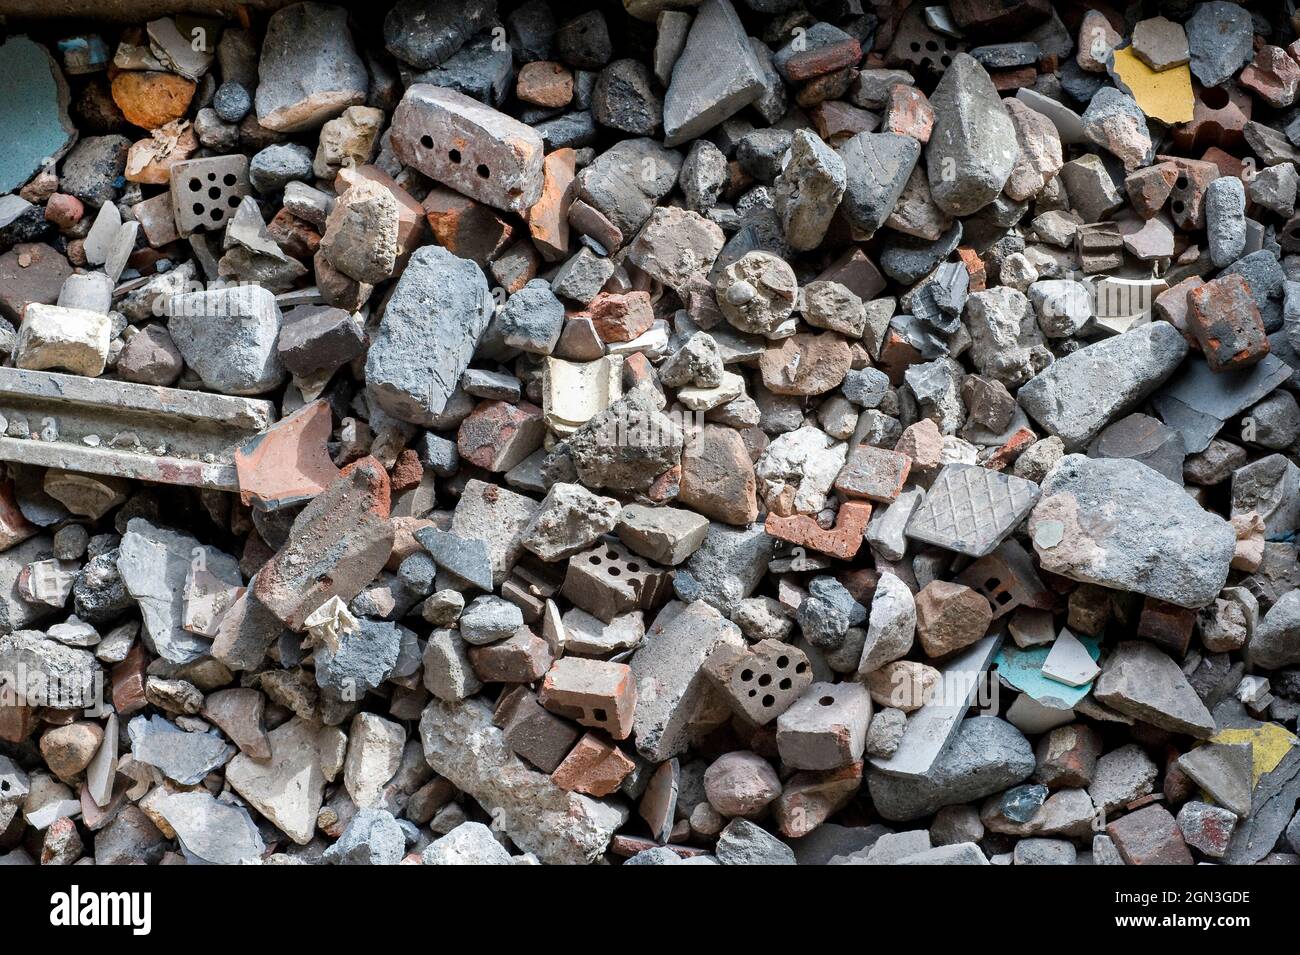 Piles of waste rubble at a materials recycling facility in England. Stock Photo